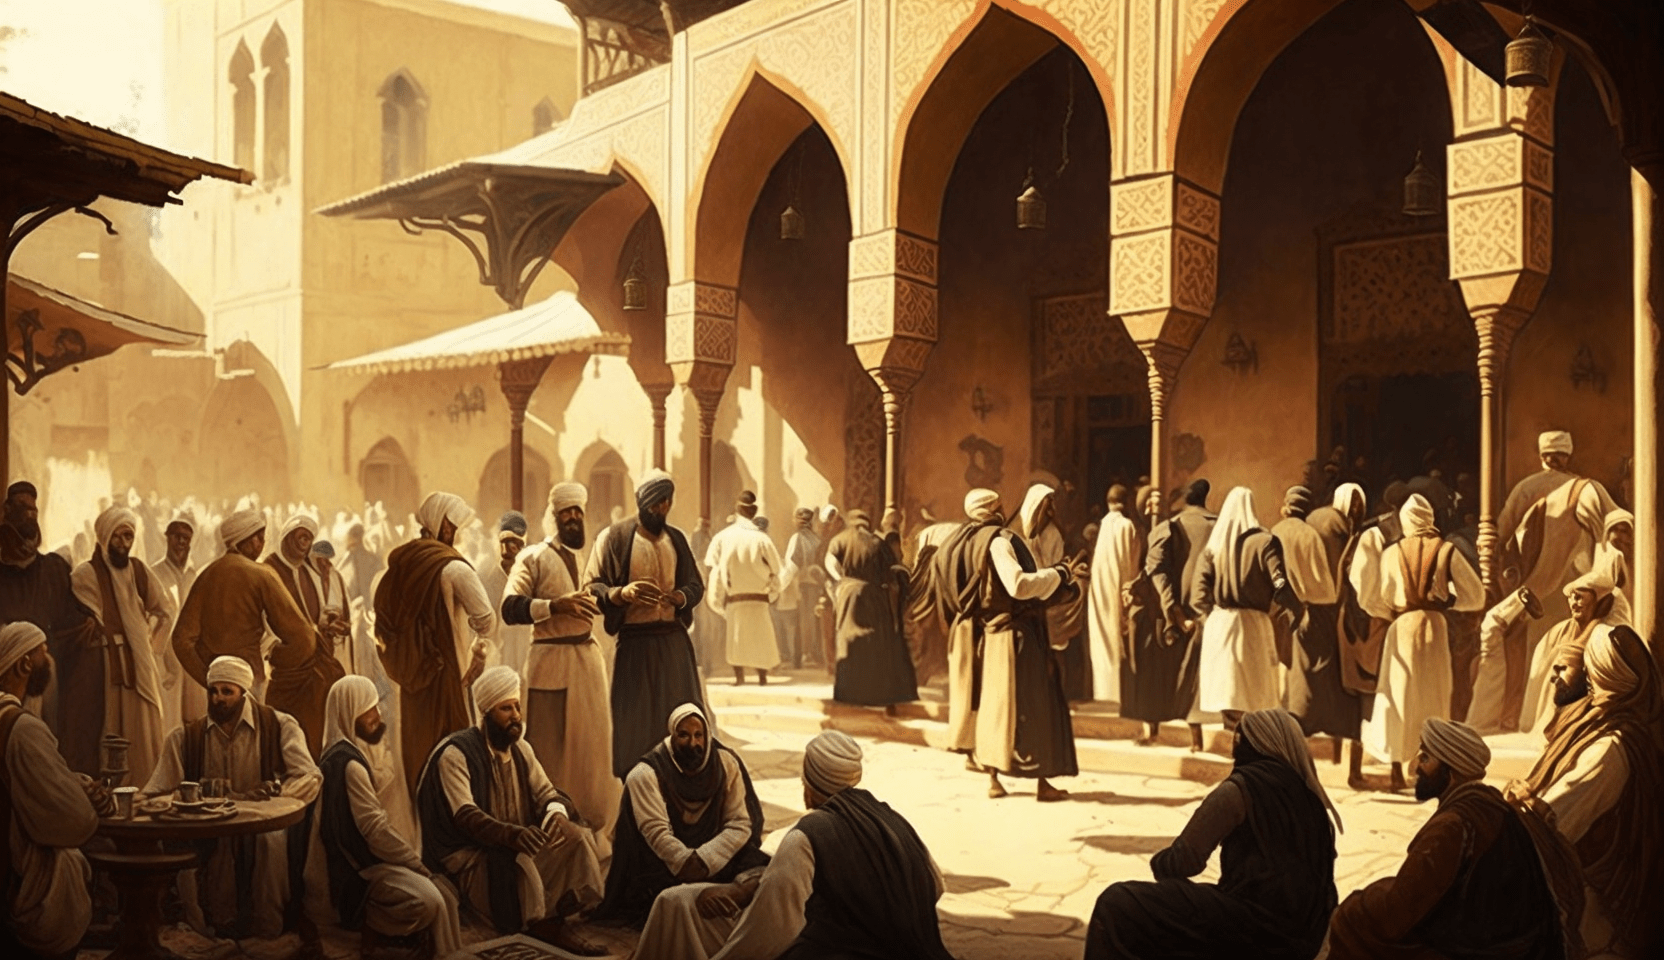 Muslims in the courtyard if the masjid